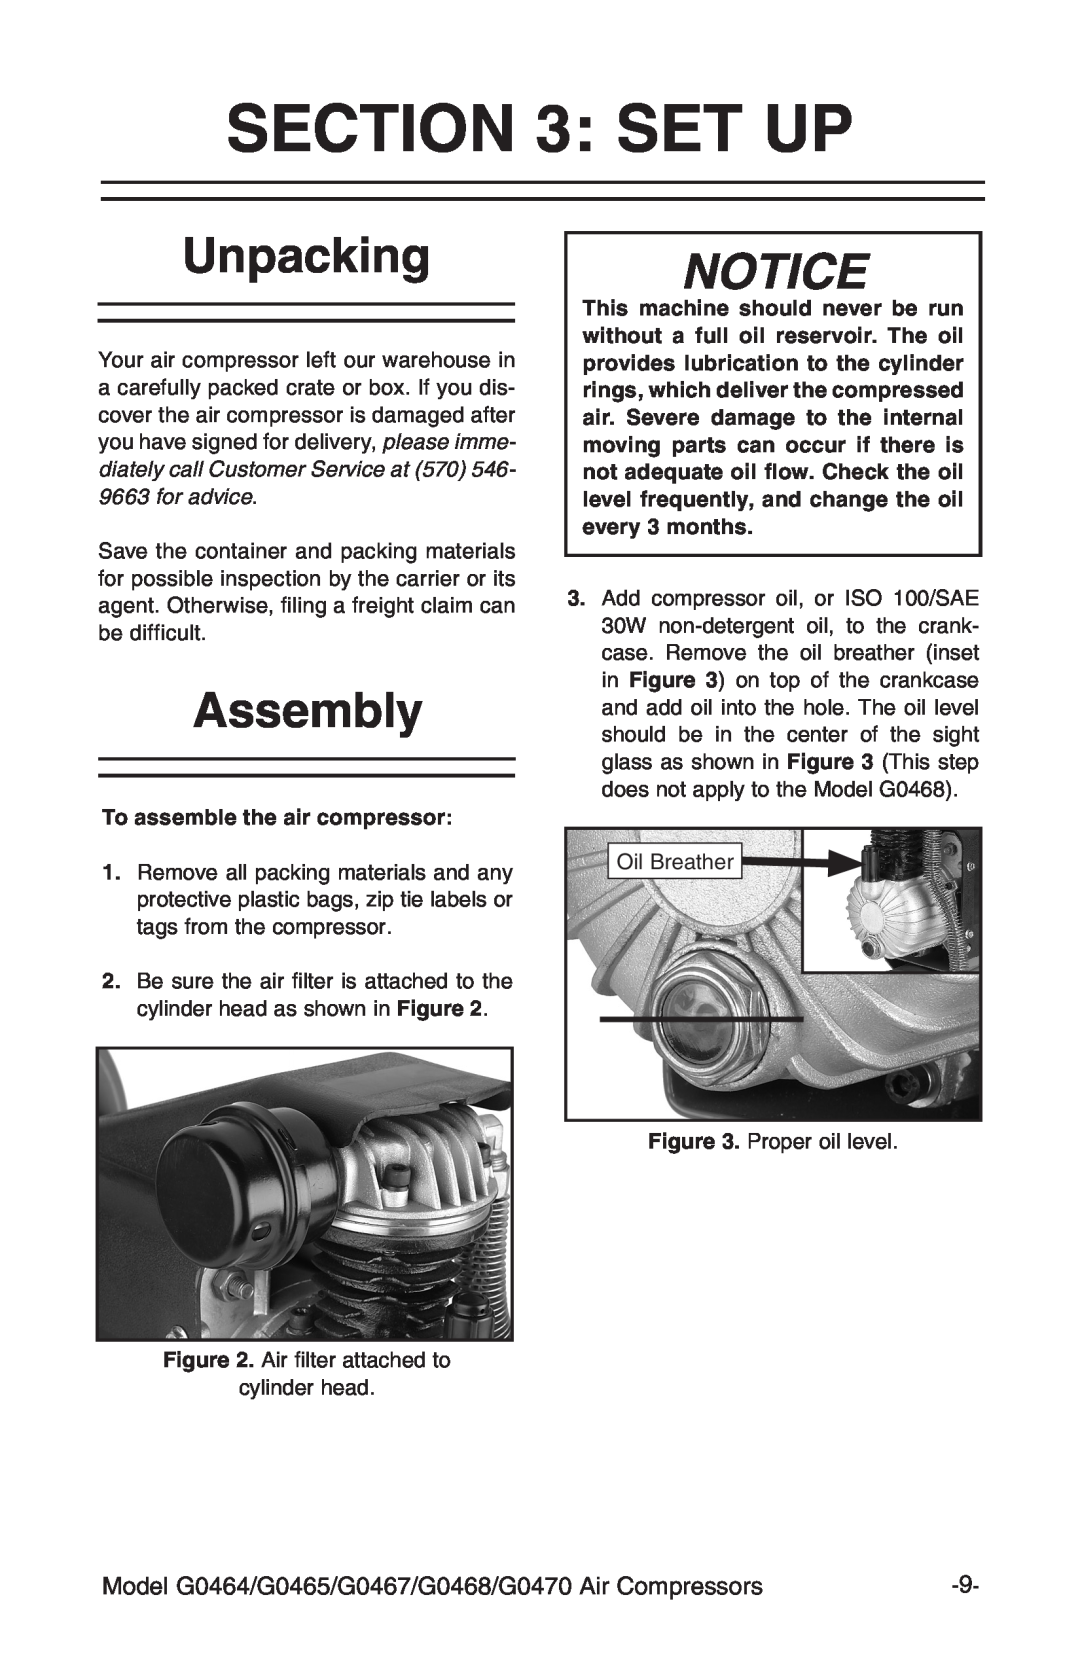 Grizzly G0465, G470, G0468, G0467 instruction manual Set Up, Unpacking, Assembly, To assemble the air compressor 